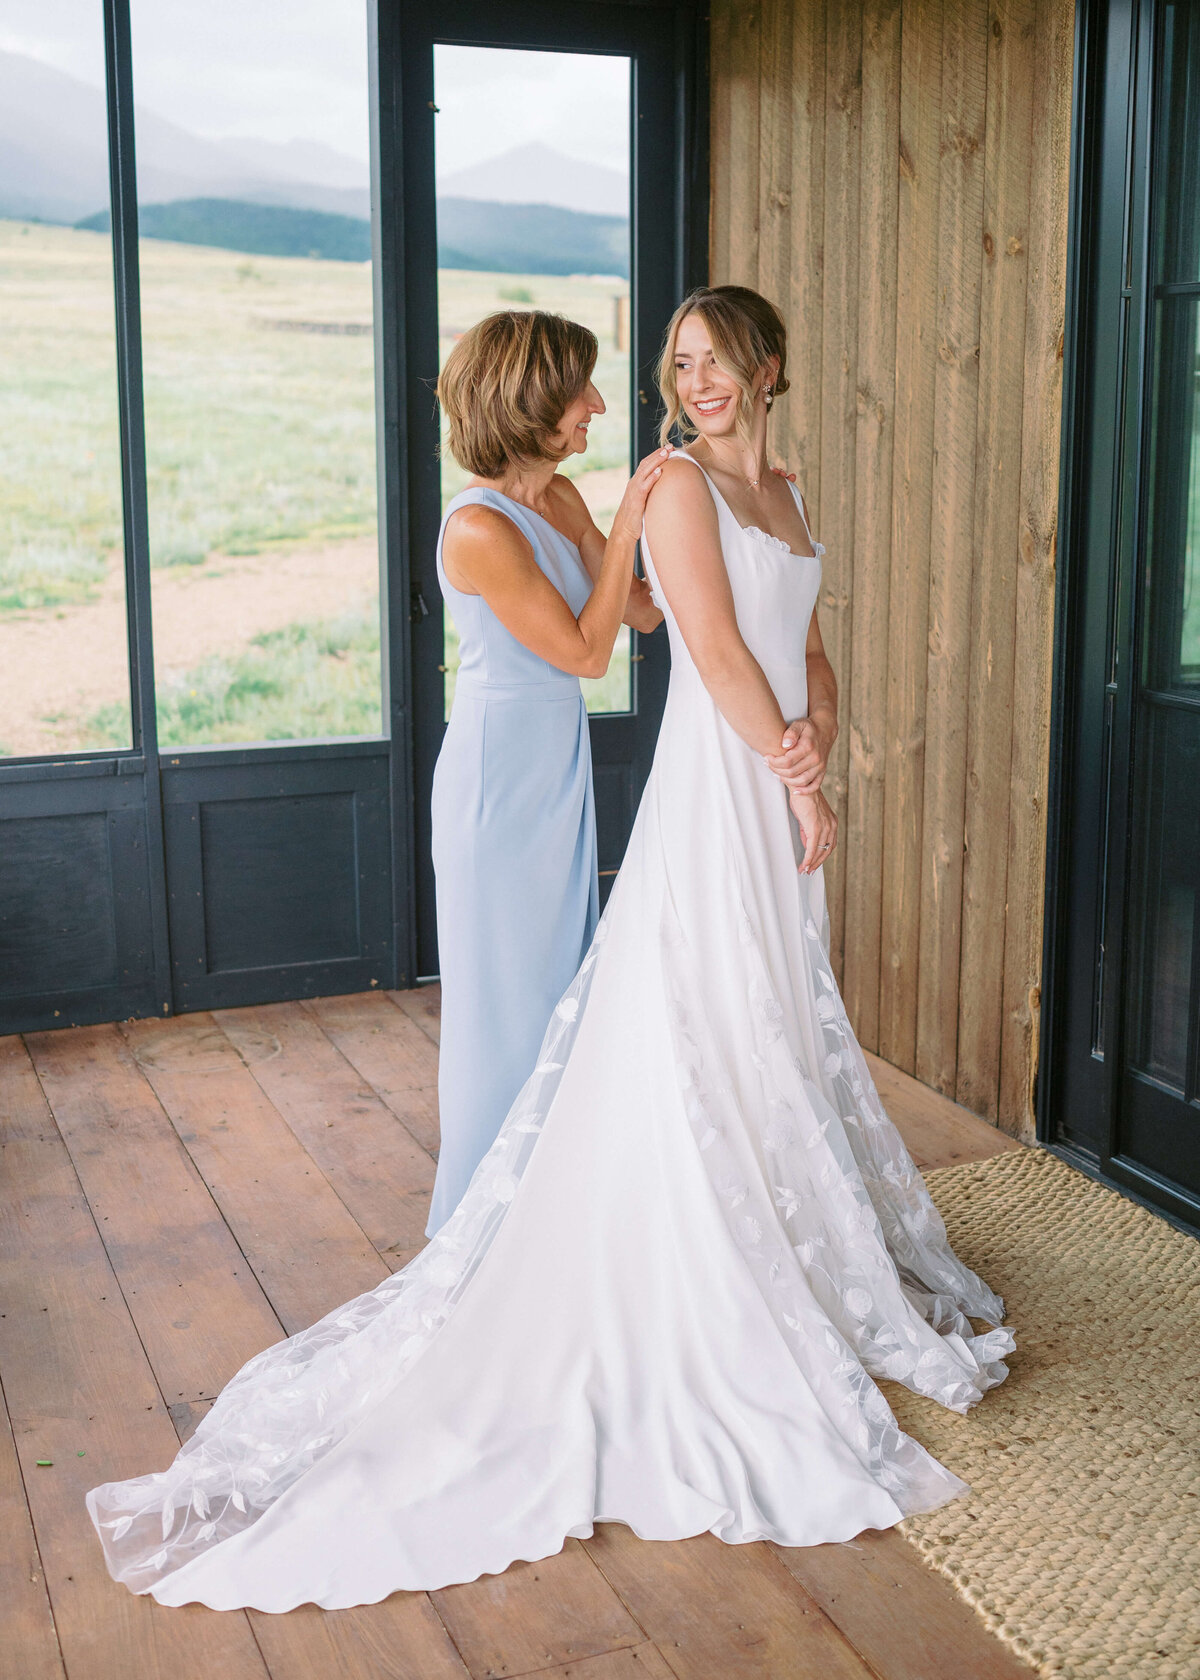 In a light blue dress, the mother of the bride shares a moment with her daughter while standing on the balcony of their cabin in an image taken by Virginia wedding photographer